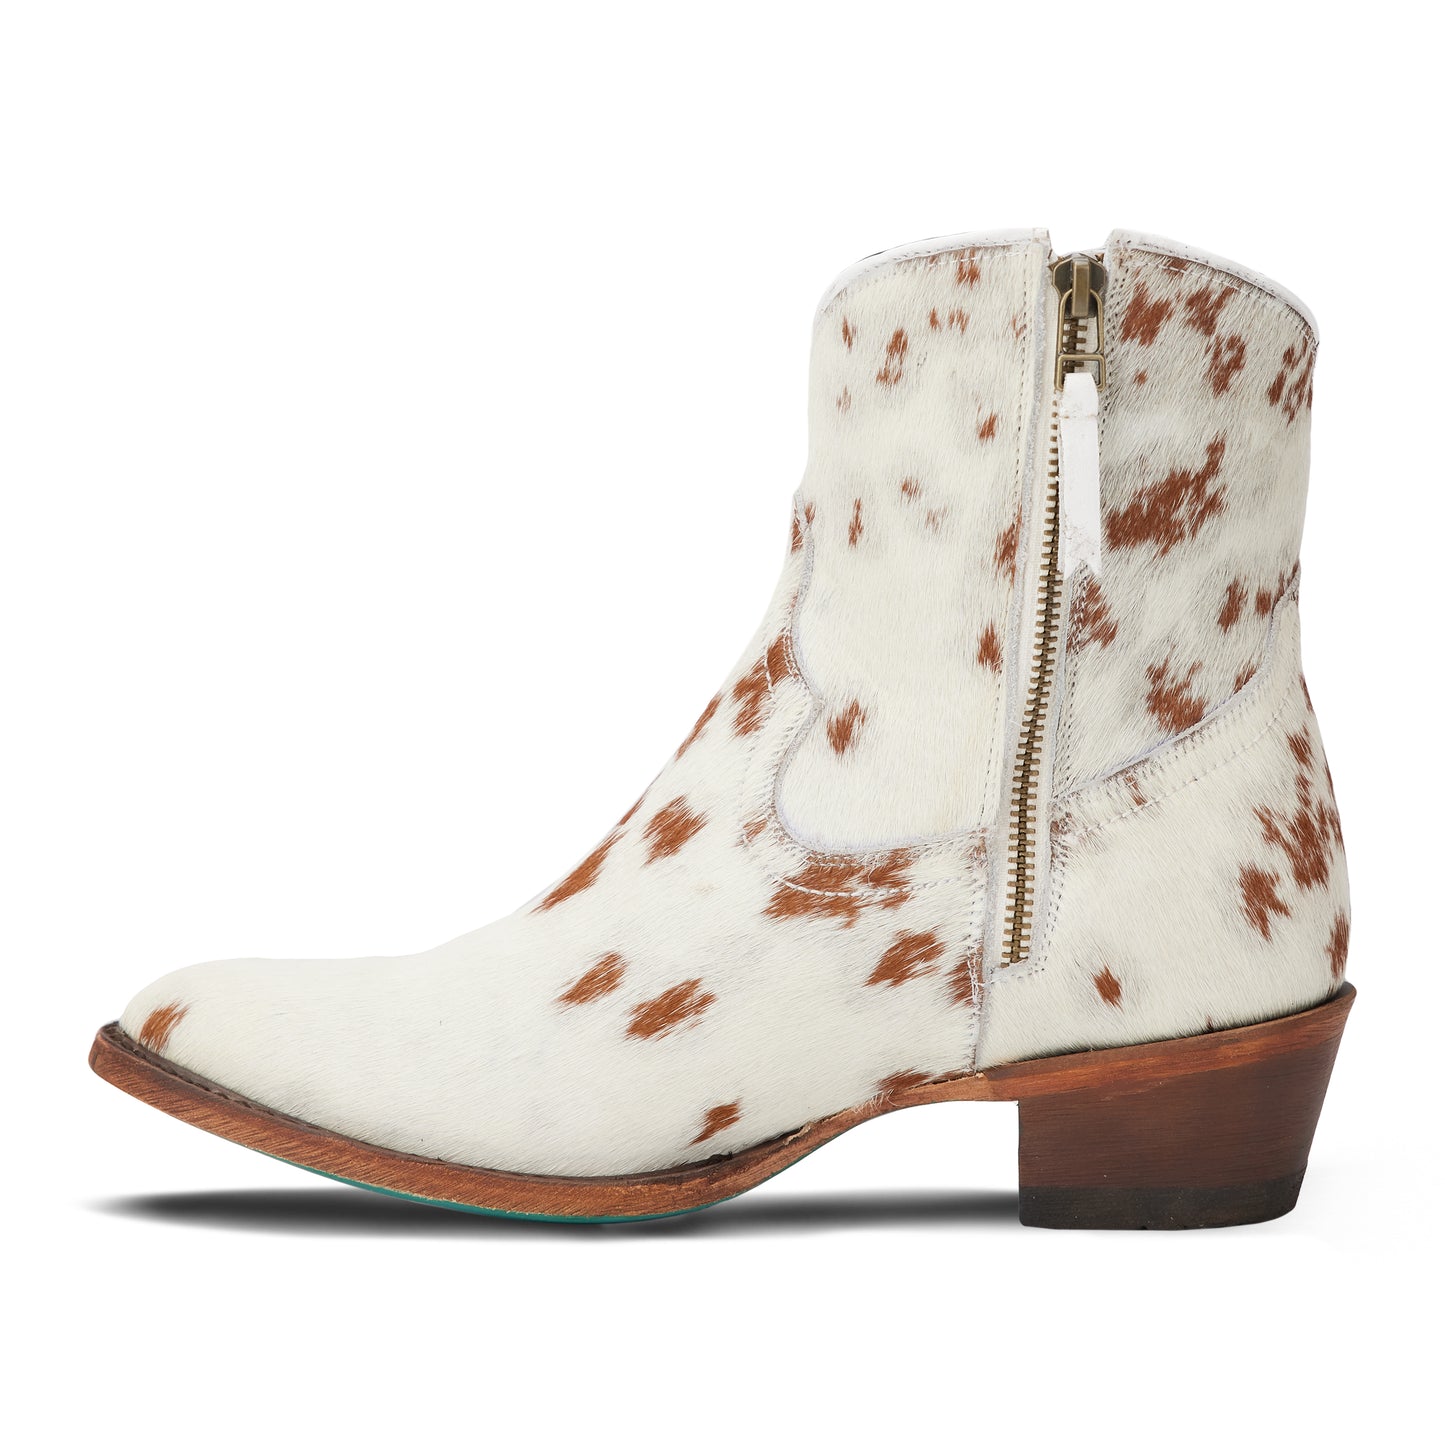 Plain Jane Bootie by Lane Boots, Cowpoke Cowgirl Boots| Bourbon Cowgirl